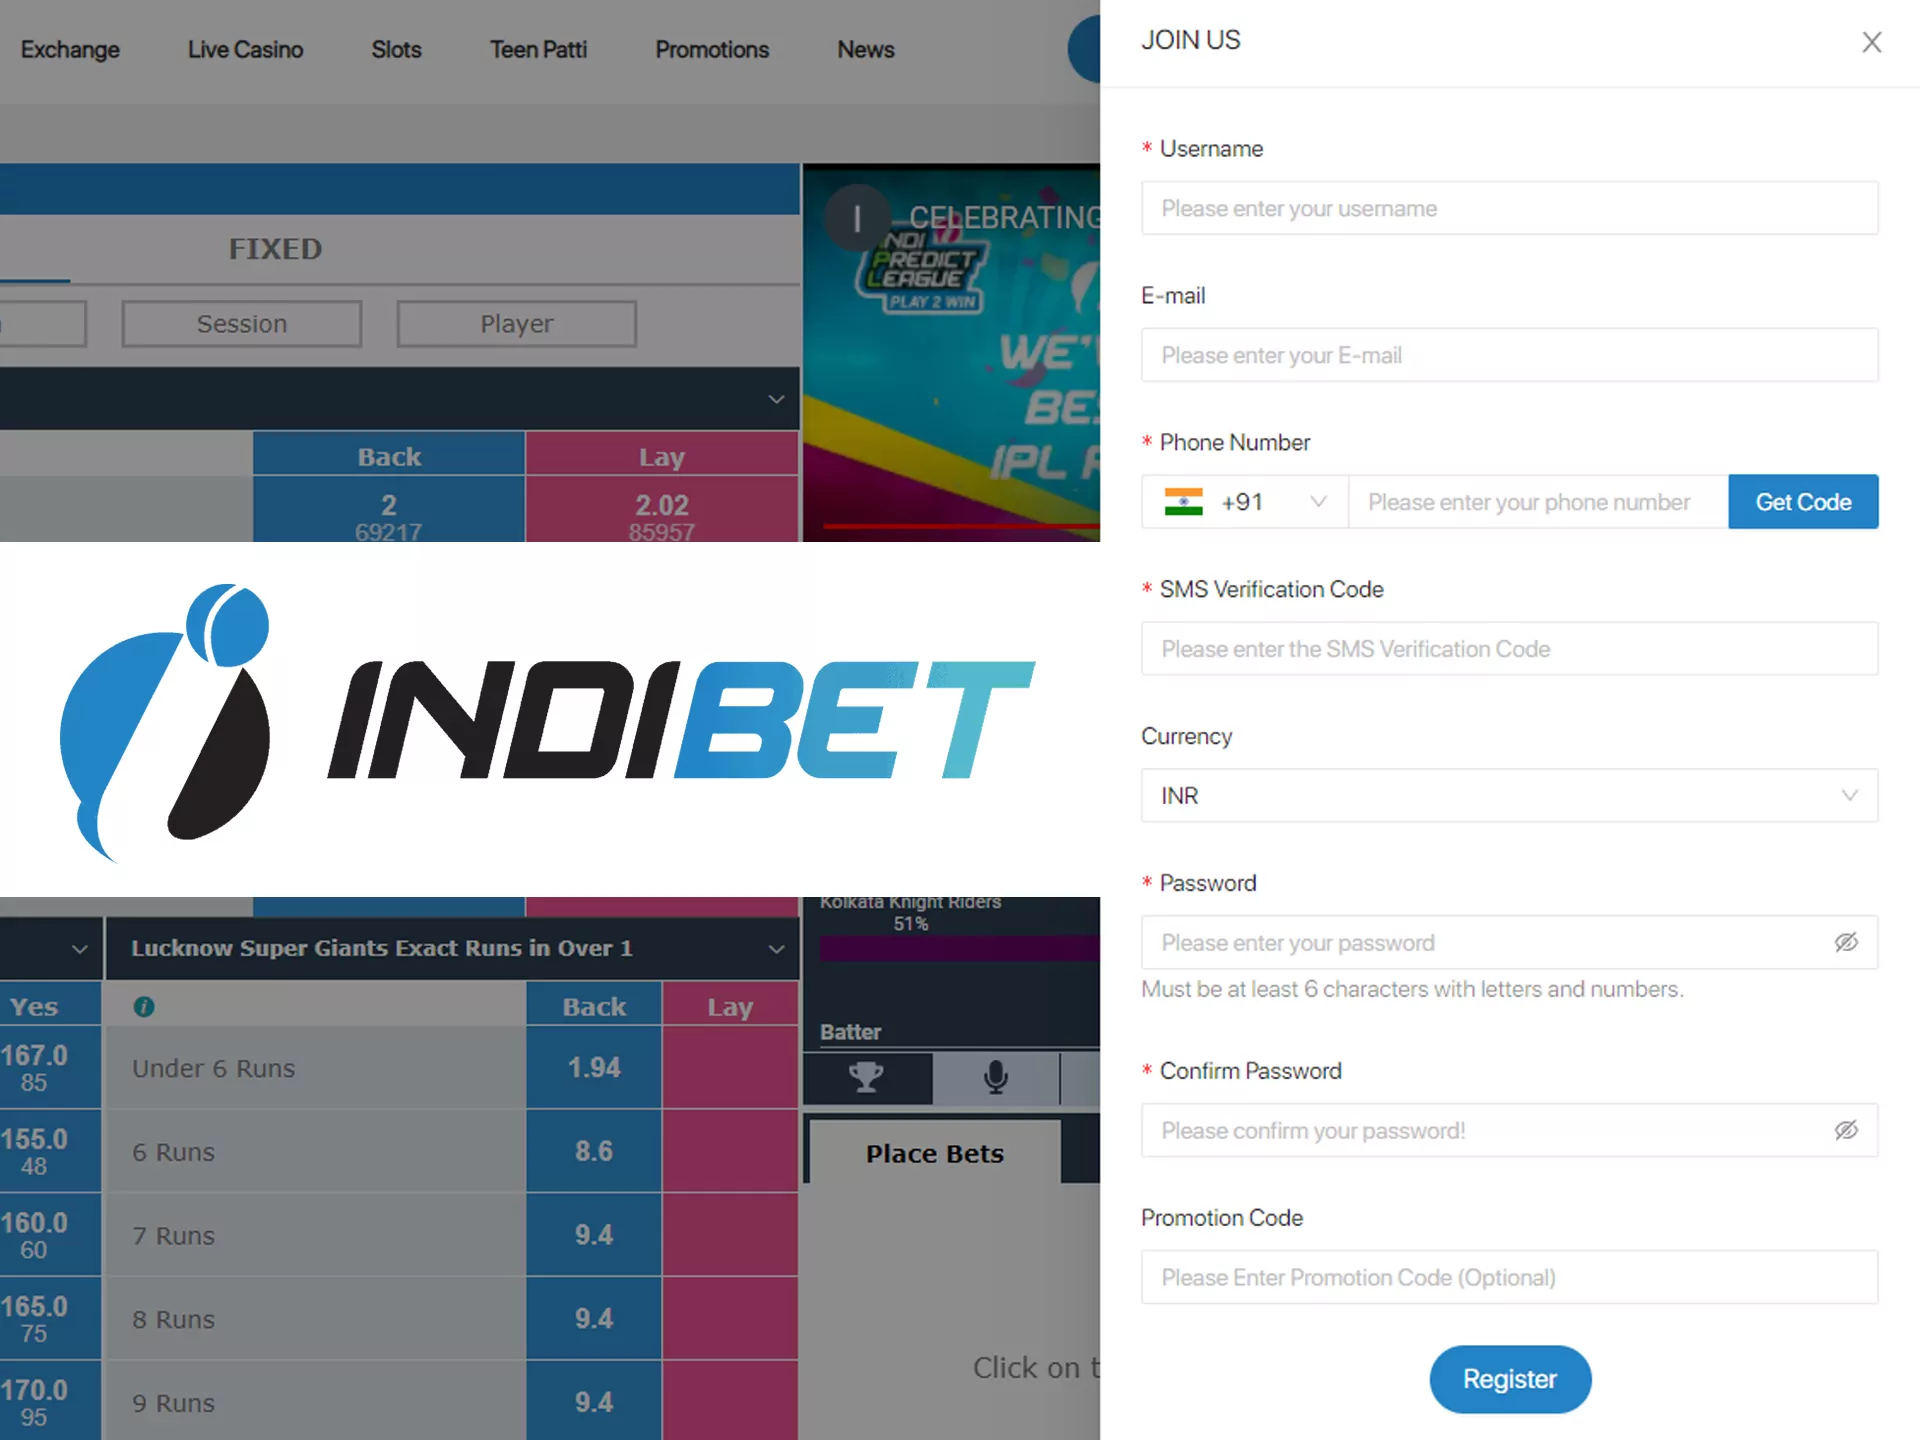 Use your email and password to log in to Indibet.